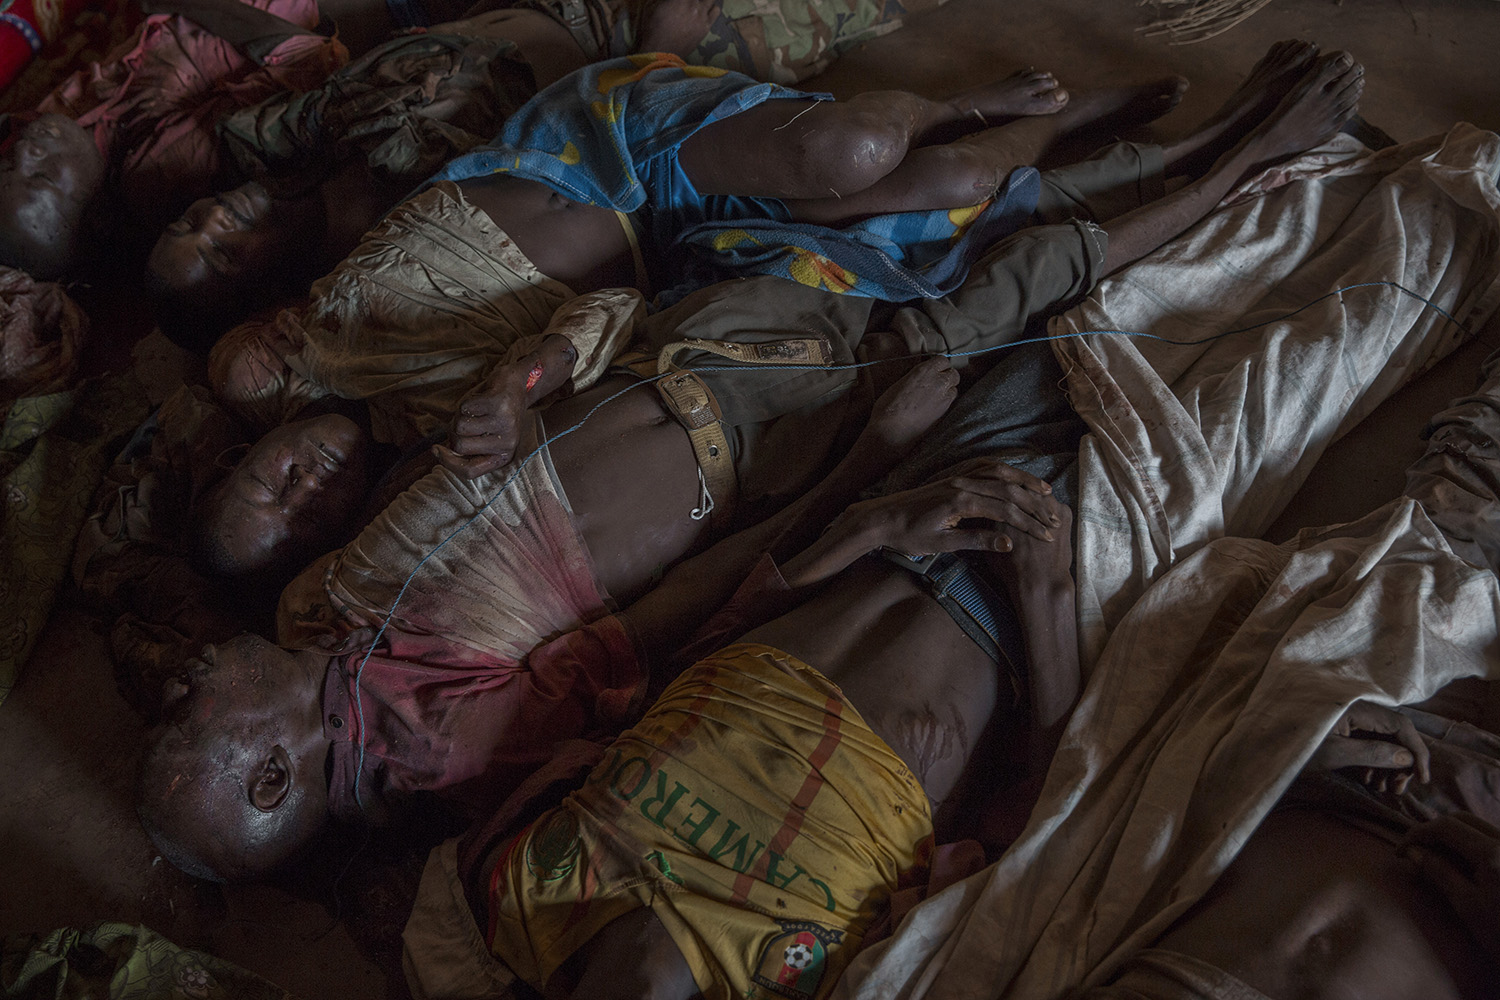 At the morgue of Ali Babolo mosque in the muslim district of 5Kilo, 58 bodies, including 4 women, were brought following several battles launched on early morning by antibalakas. Most of the dead were killed by machete blows.